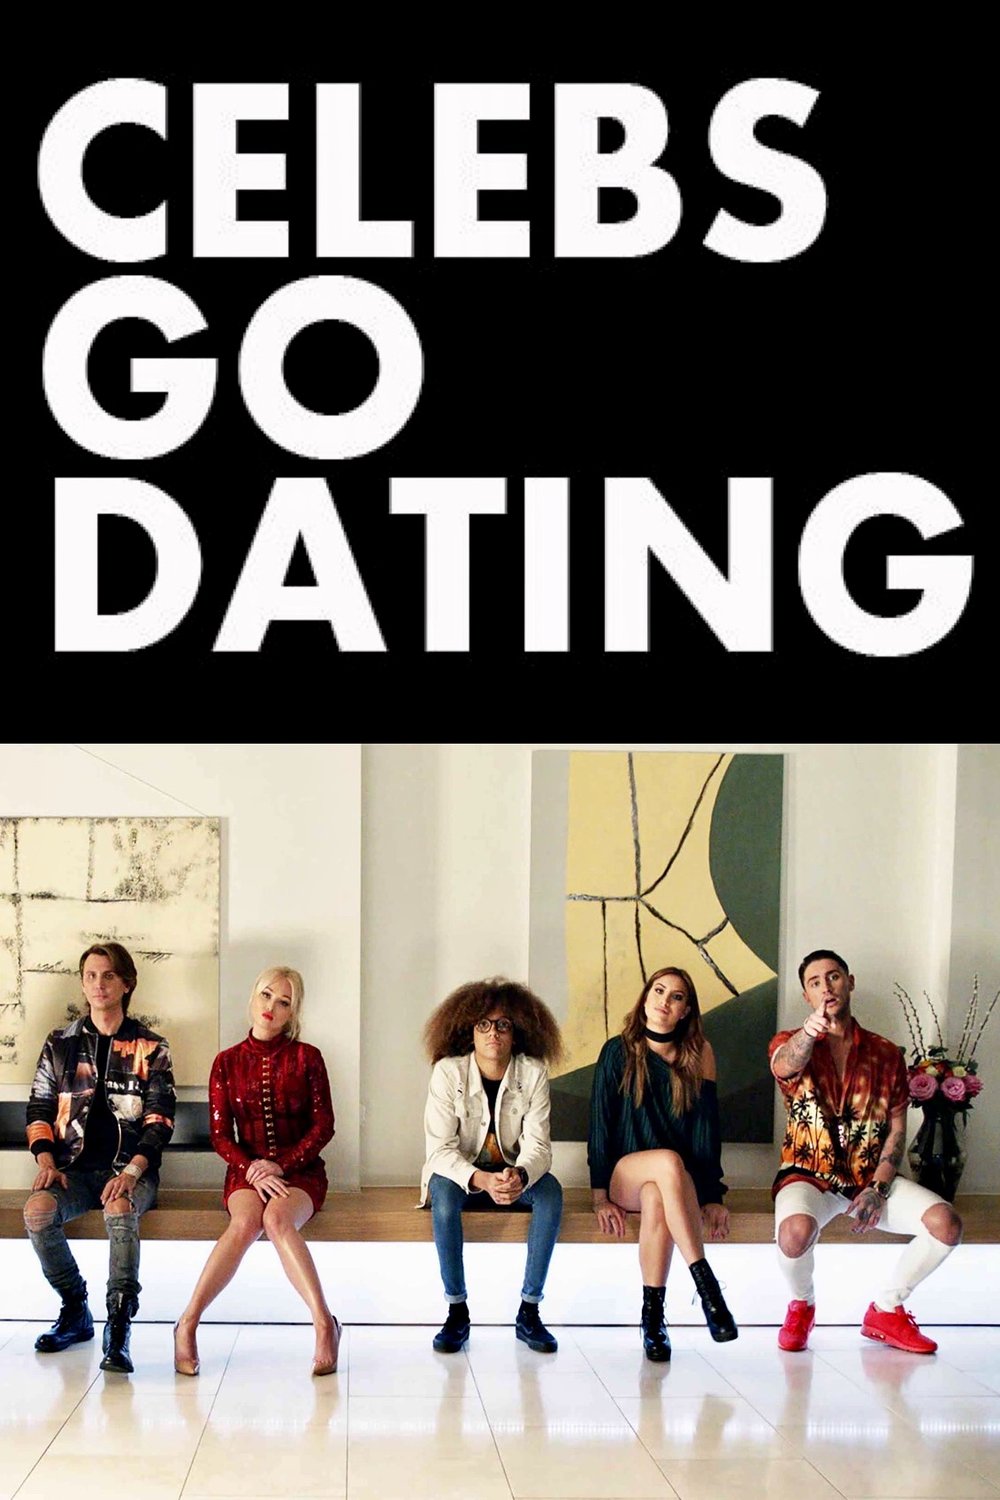 Poster of the movie Celebs Go Dating